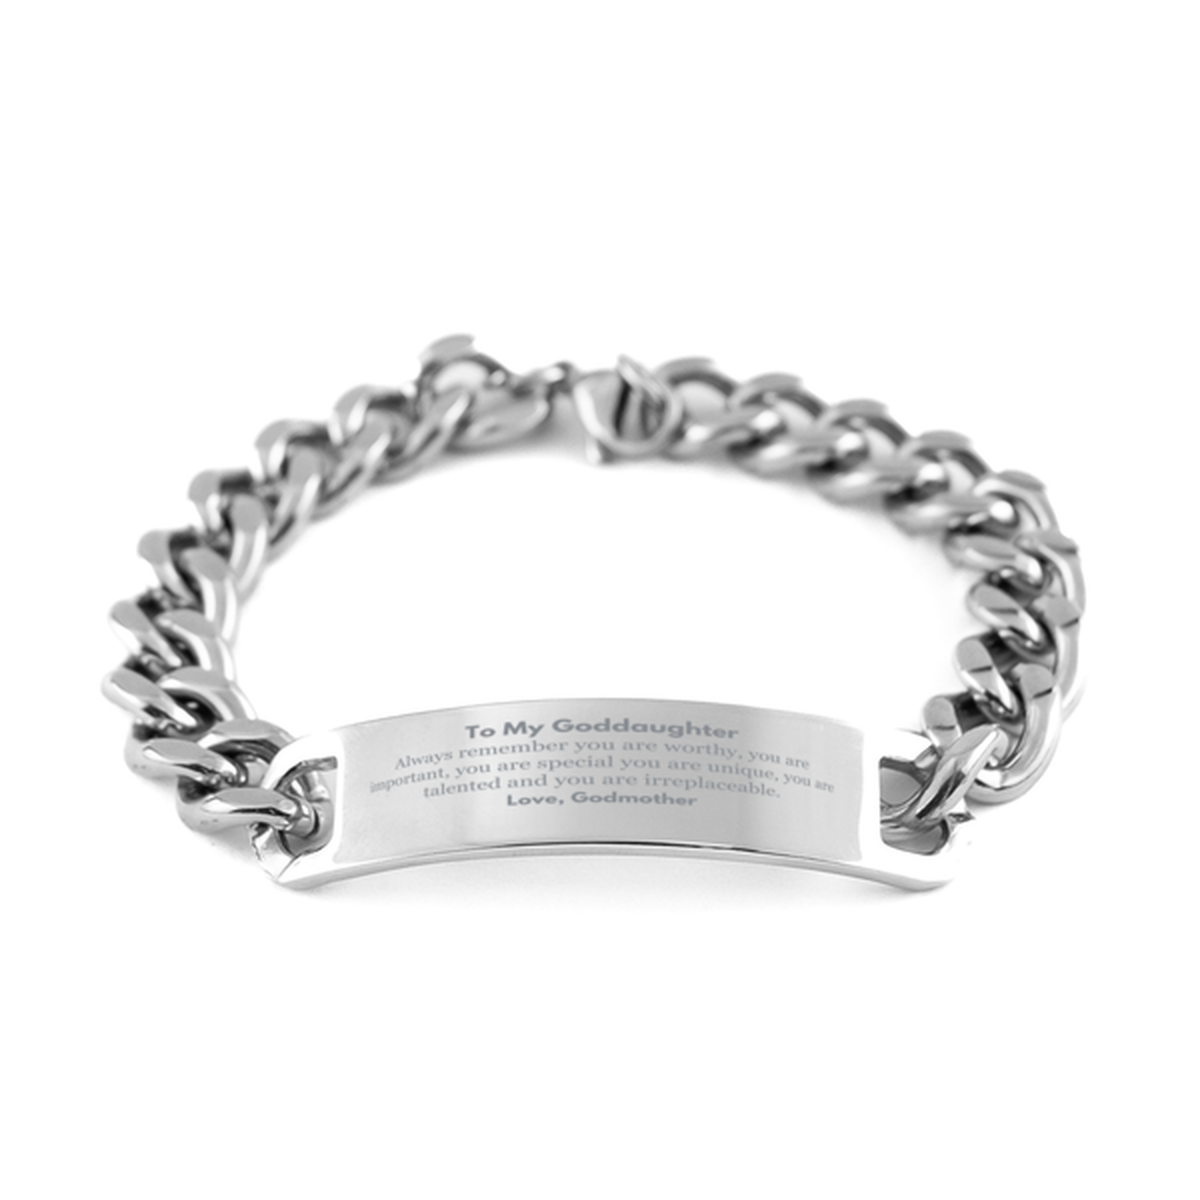 Goddaughter Birthday Gifts from Godmother, Inspirational Cuban Chain Stainless Steel Bracelet for Goddaughter Christmas Graduation Gifts for Goddaughter Always remember you are worthy, you are important. Love, Godmother